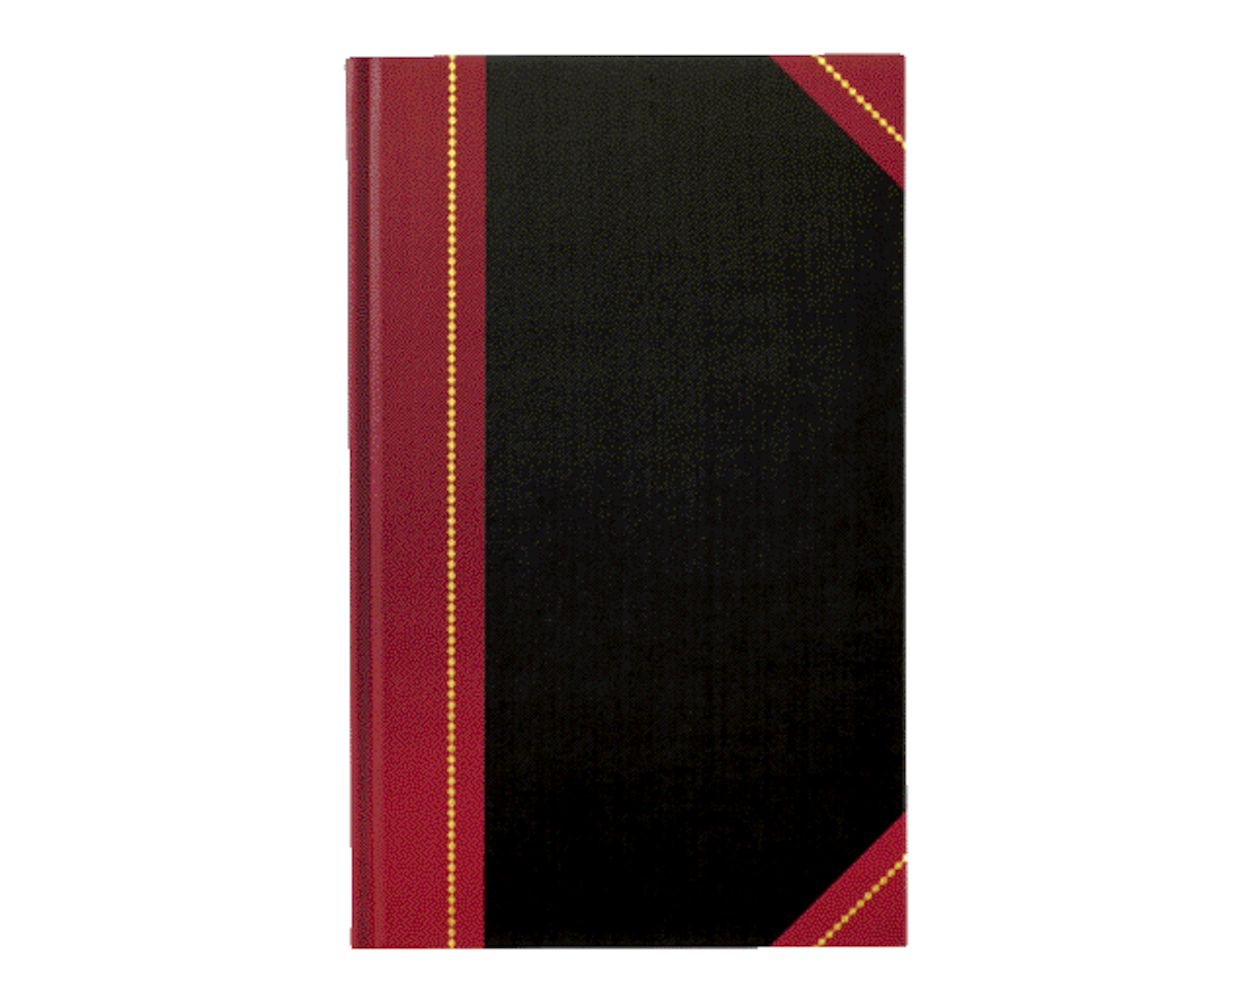 8.25 x 10.75 Inches TOPS Business Forms Inc. Black and Maroon ARB810R3M Adams Record Ledger 5 Squares per Inch 300 Tinted Pages